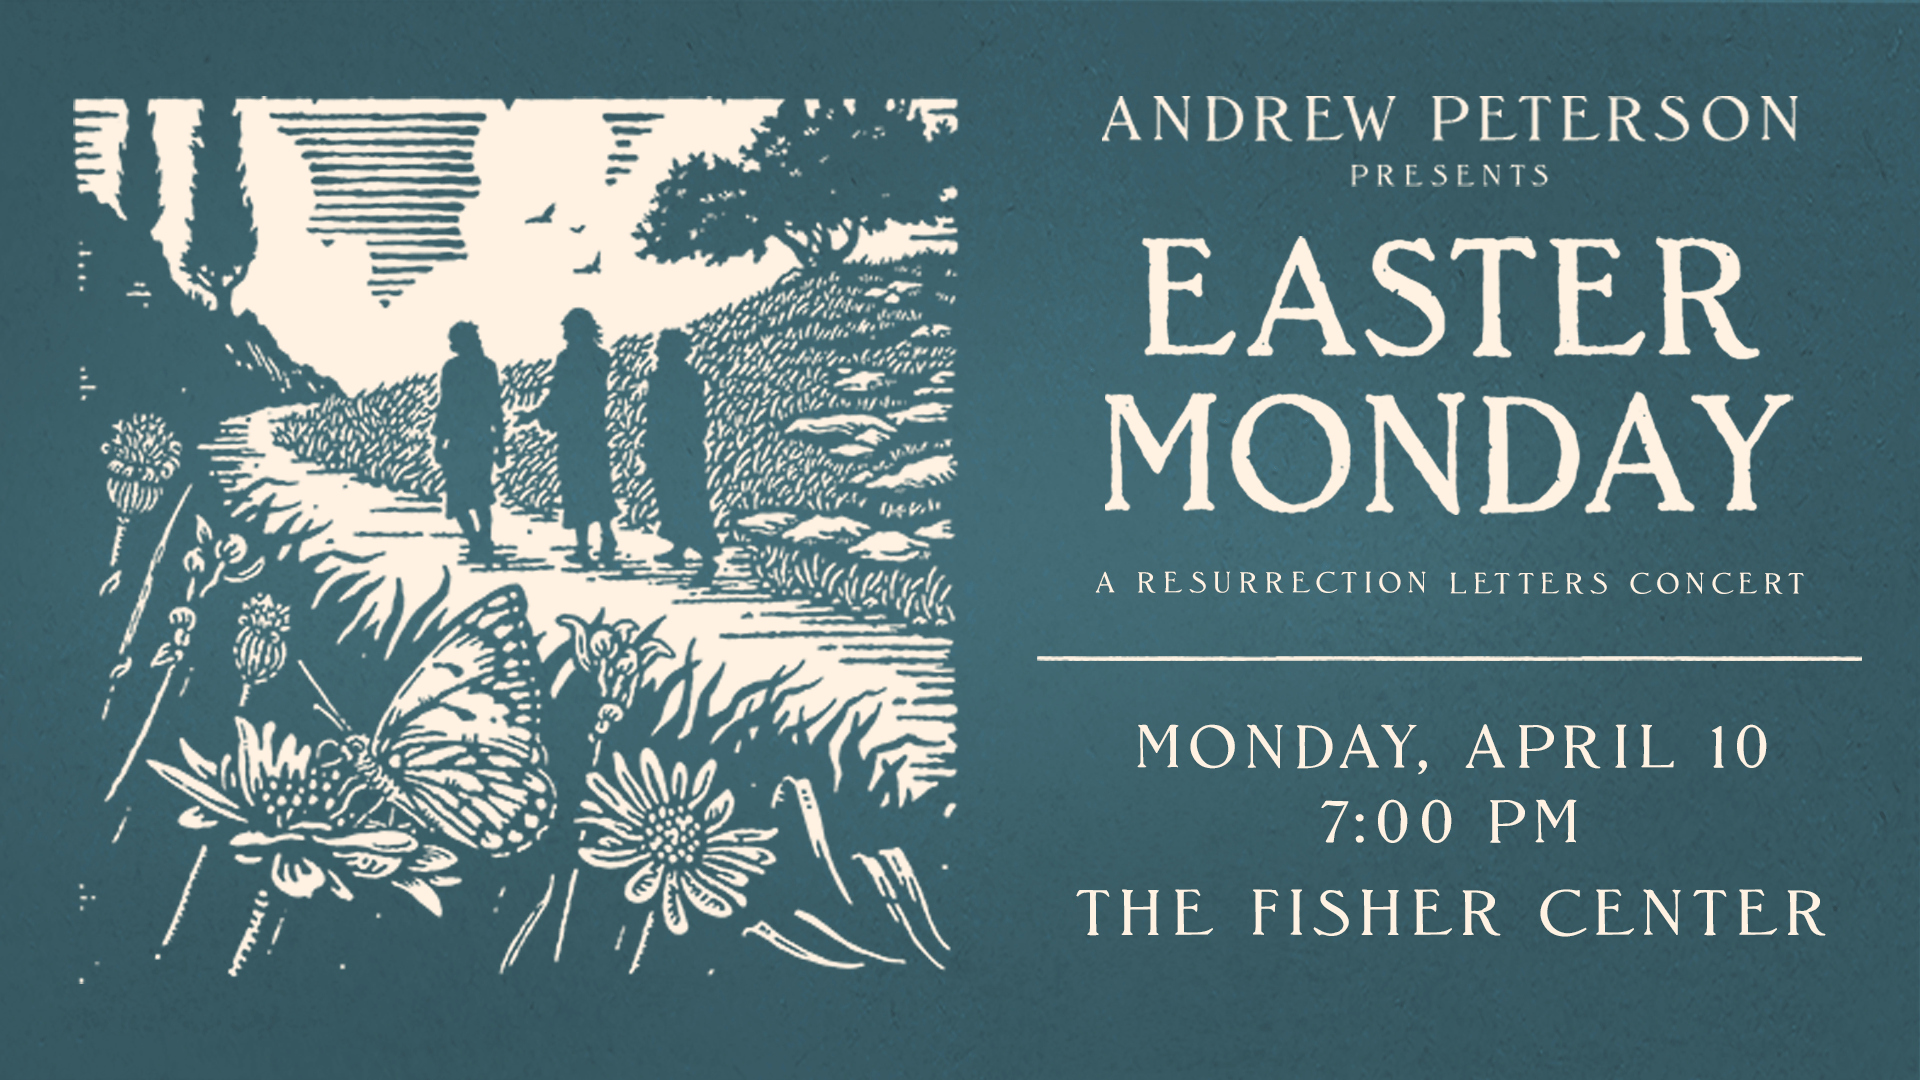 Andrew Peterson Presents Easter Monday